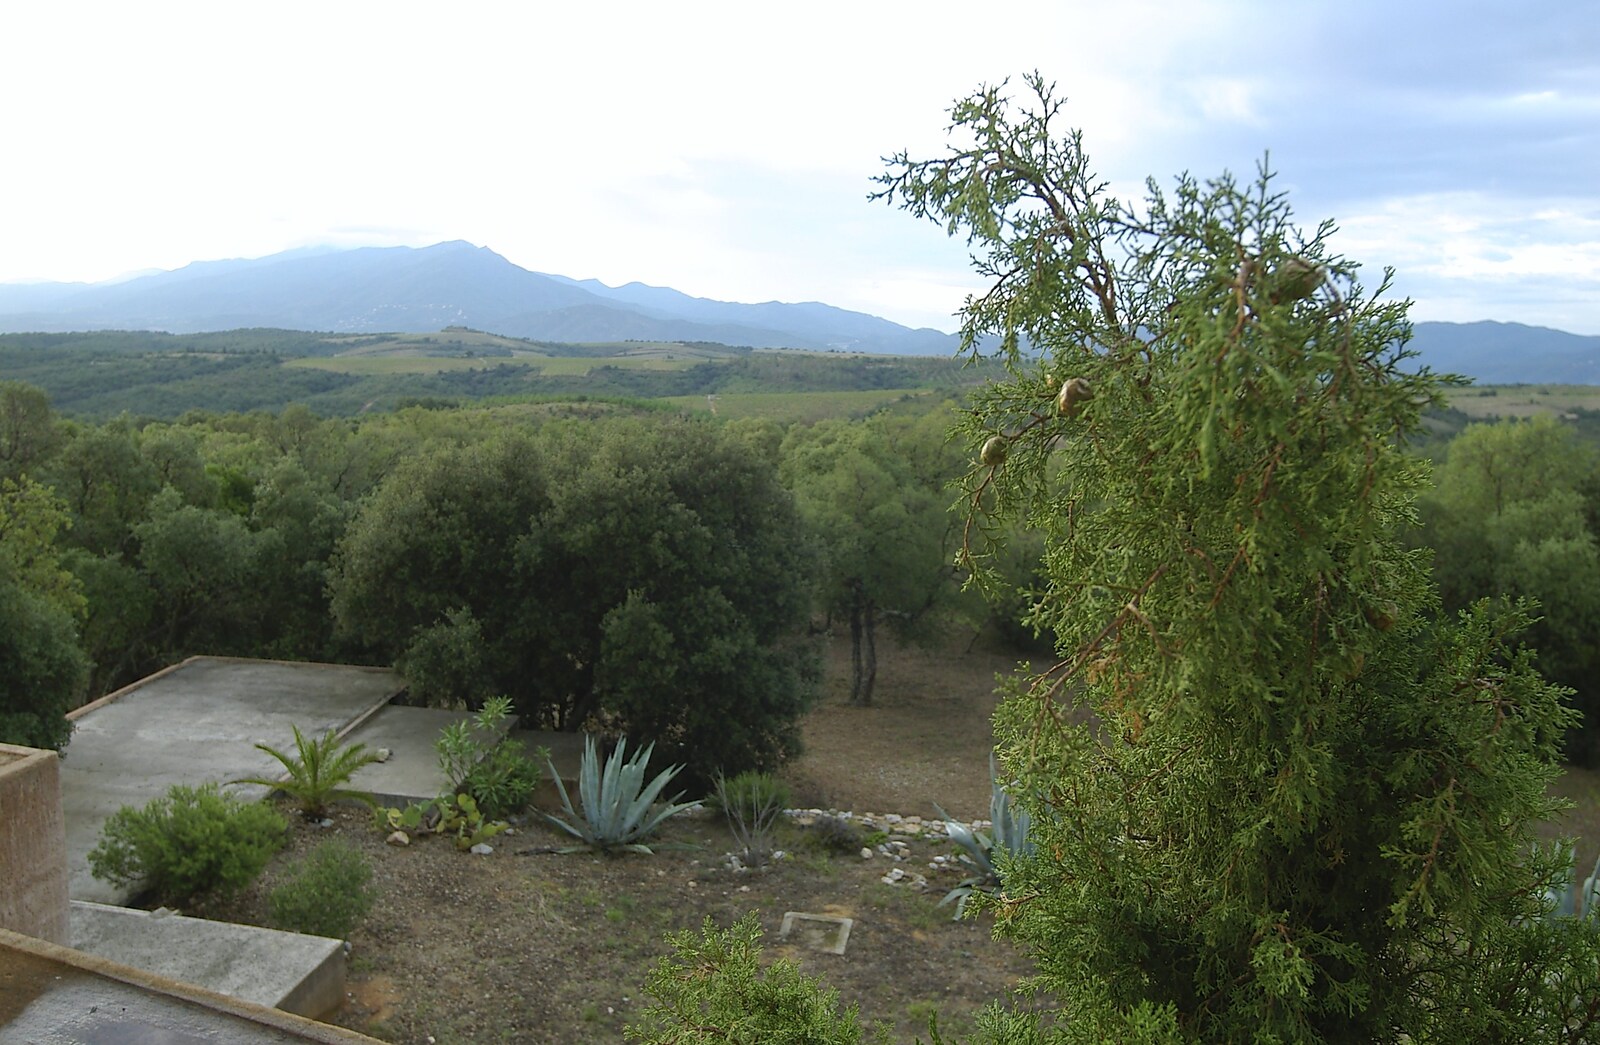 The view from the bedroom window from A Roussillon Farmhouse, Fourques, Perpignan, France - 17th September 2006